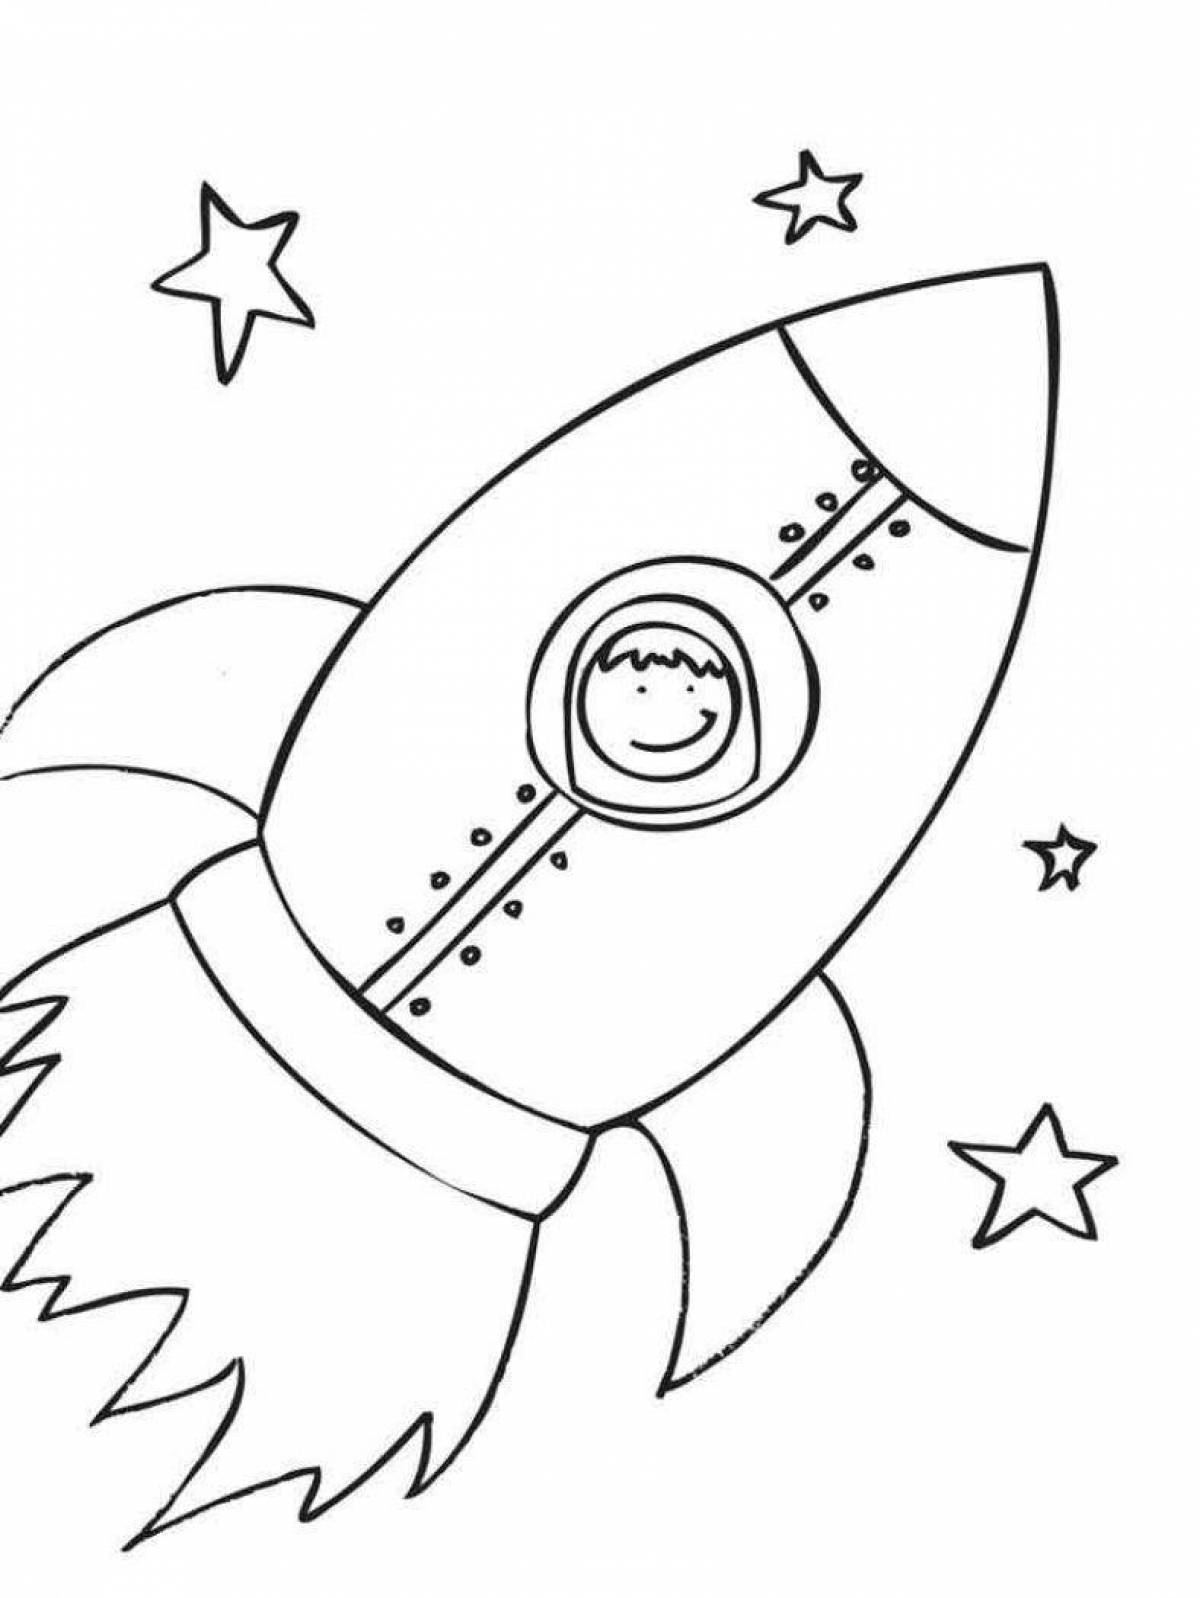 Coloring rocket for children 5-6 years old